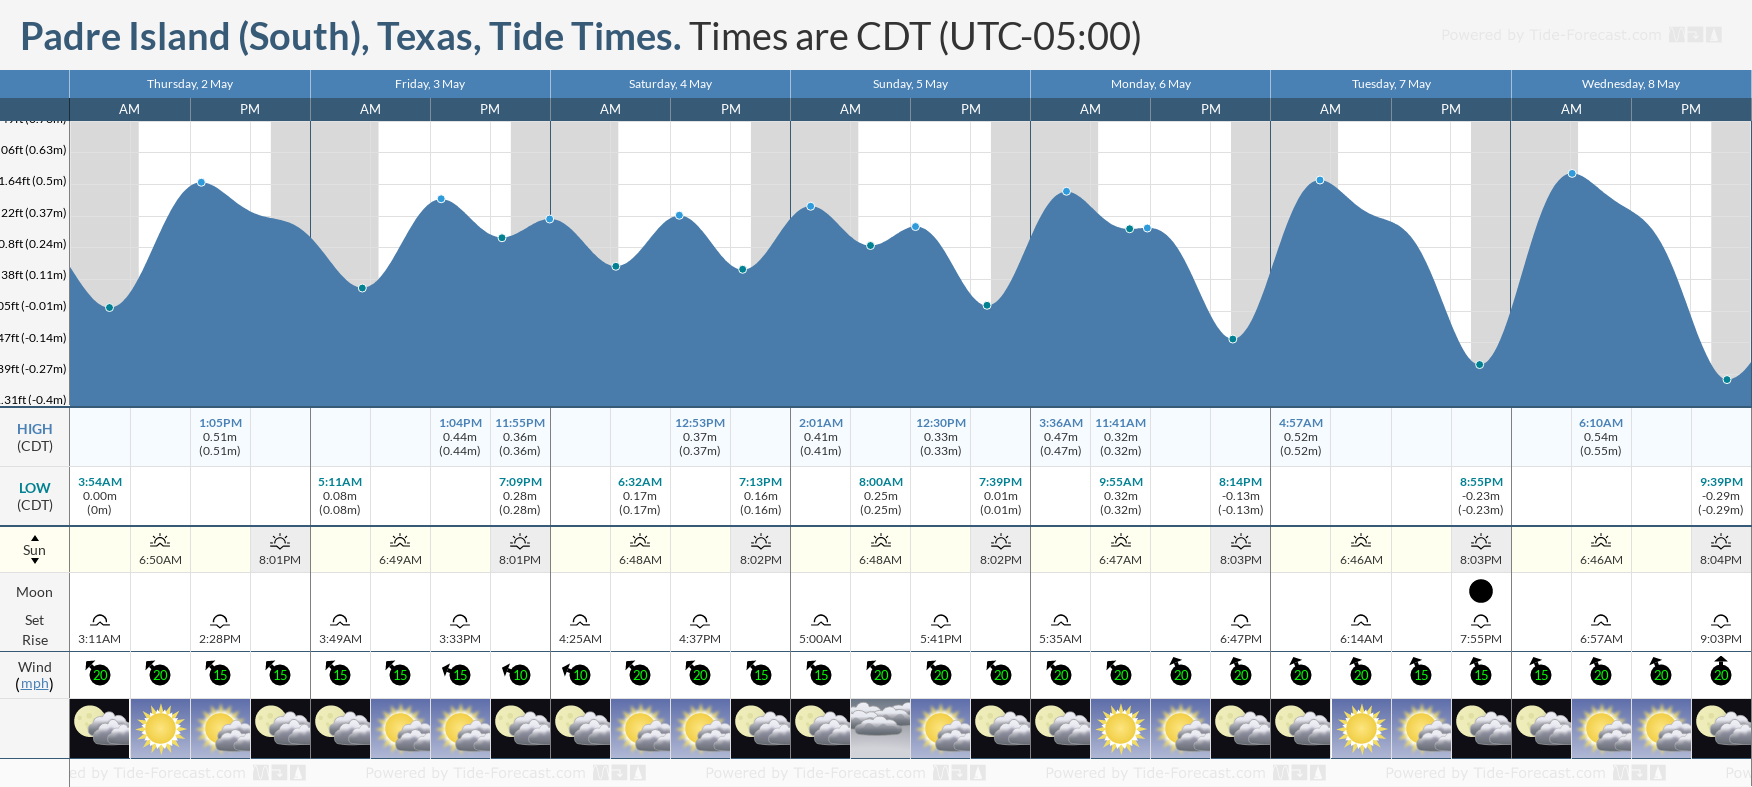 Padre Island (South), Texas Tide Chart including high and low tide tide times for the next 7 days